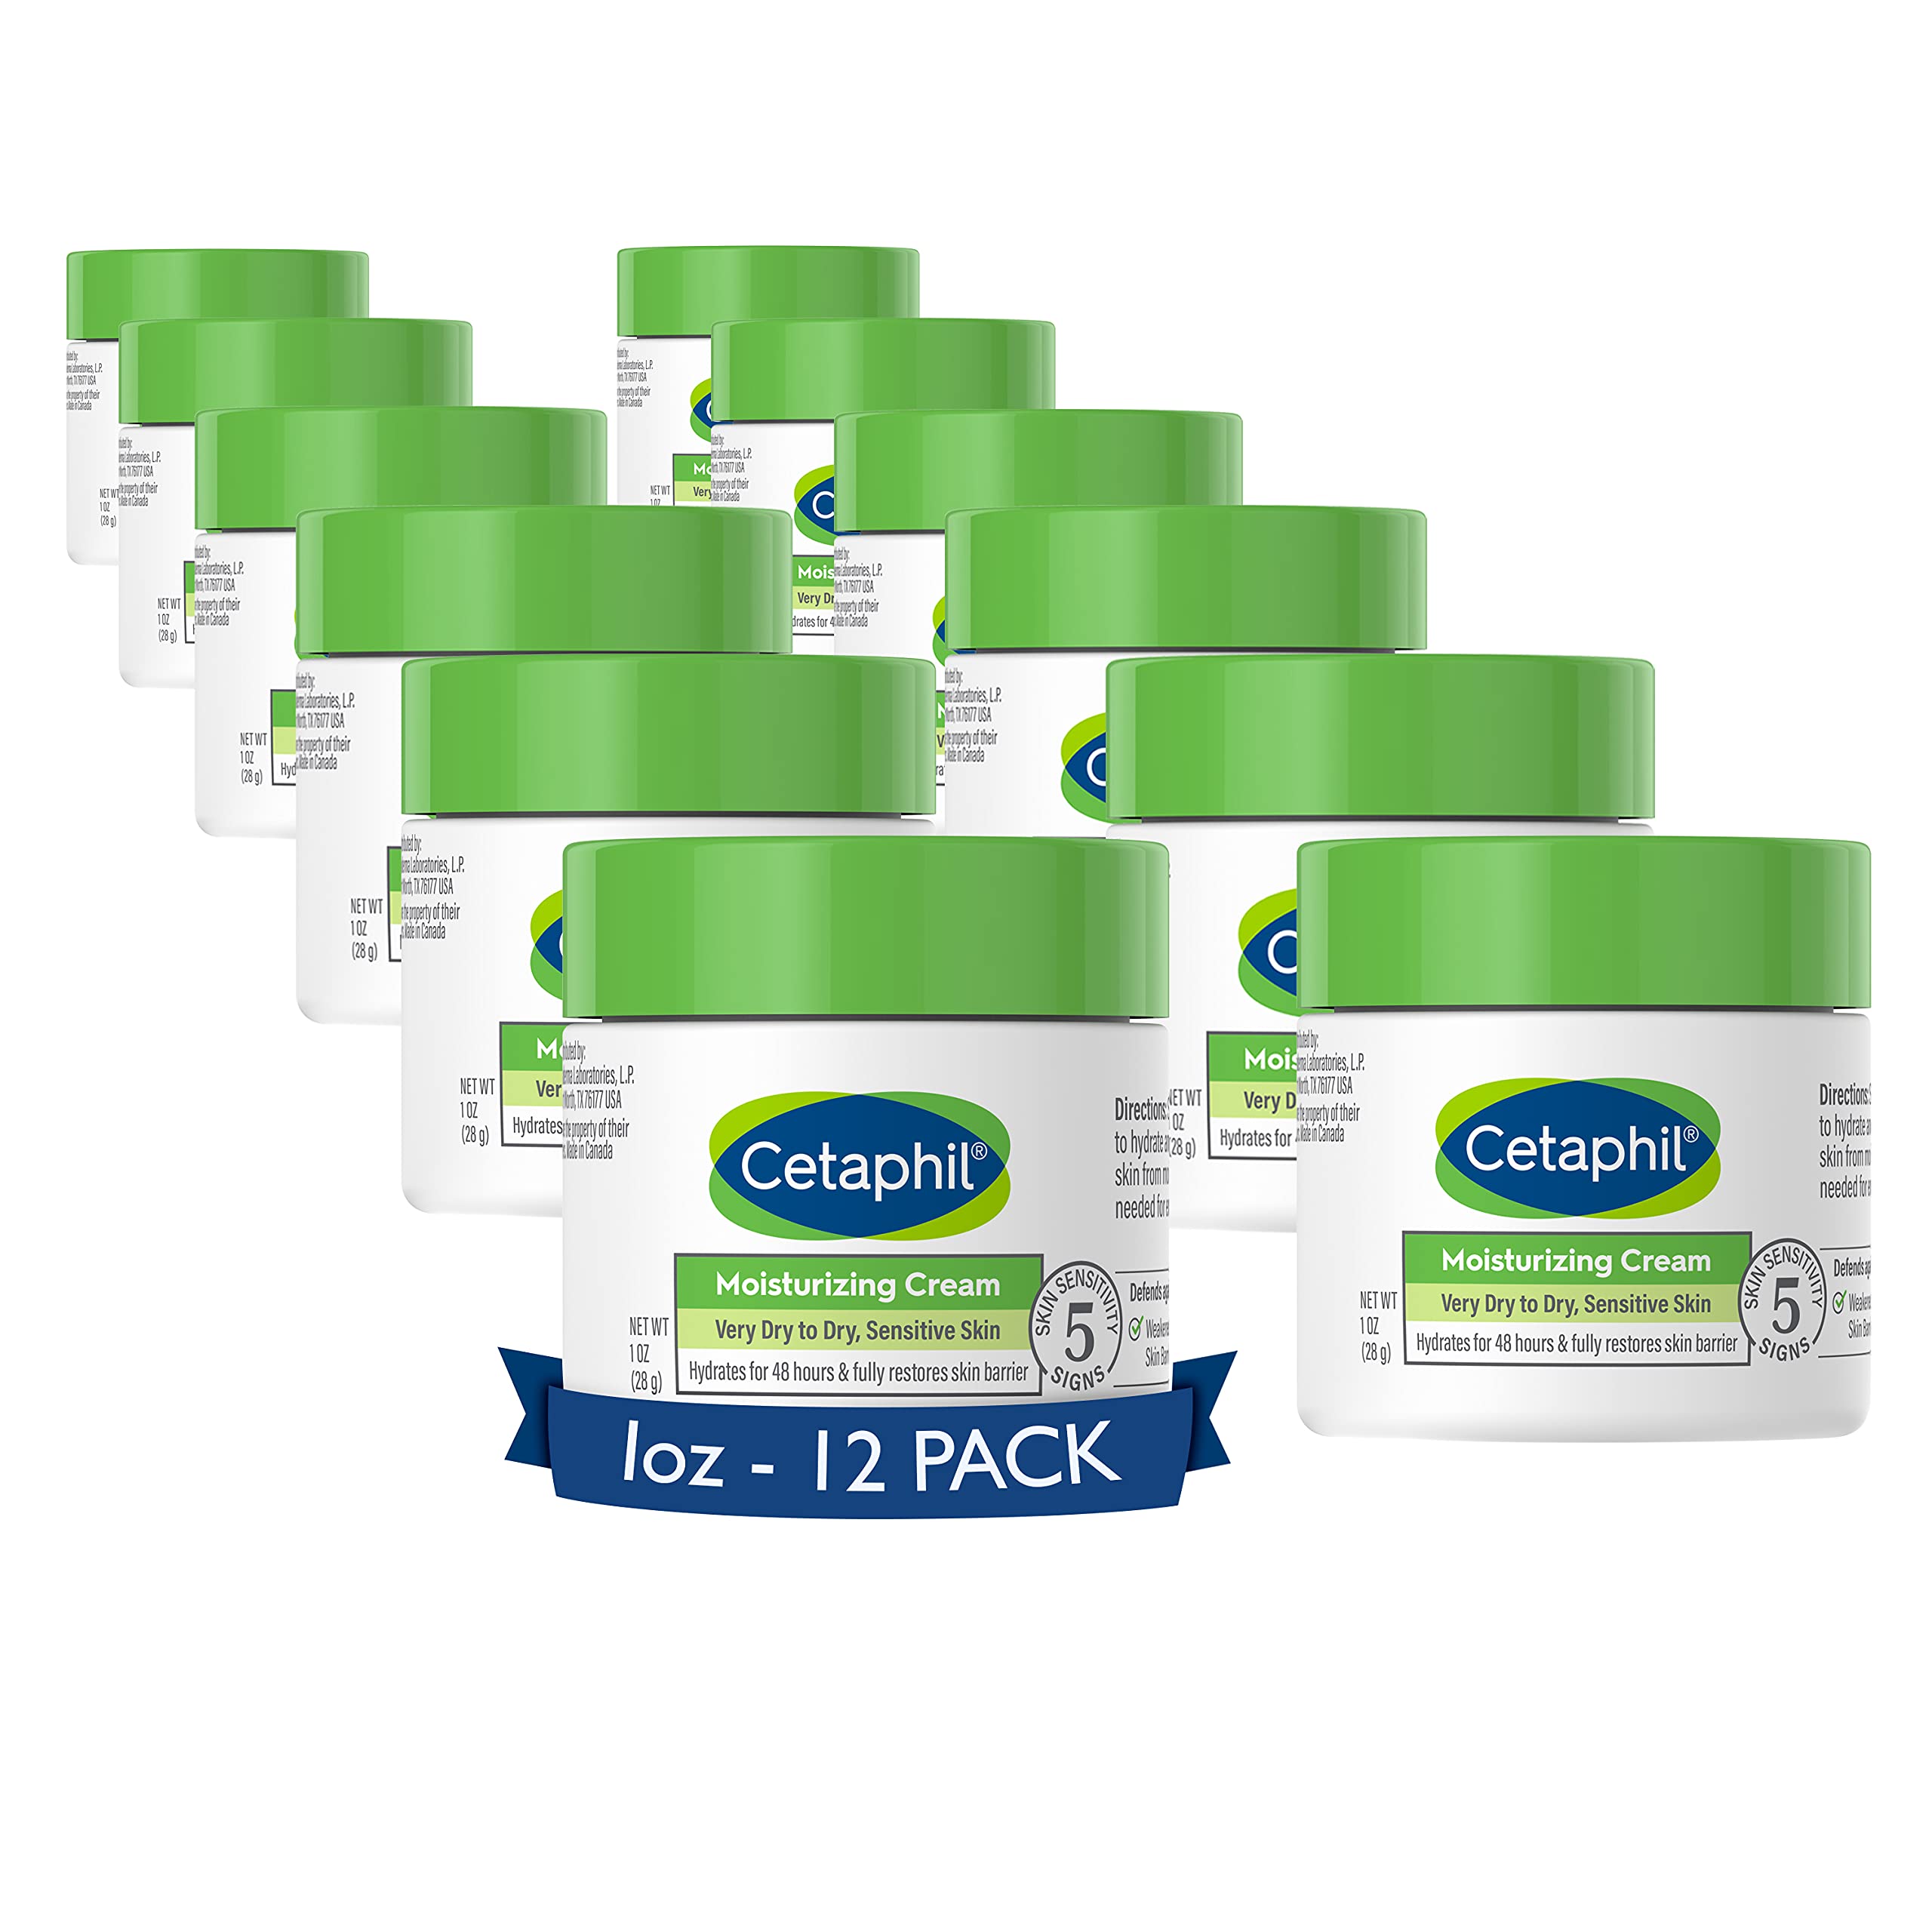 Cetaphil Body Moisturizer, Hydrating Moisturizing Cream for Dry To Very Dry, Sensitive Skin, NEW 1 OZ 12 Pack, Fragrance Free, Non-Comedogenic, Non-Greasy